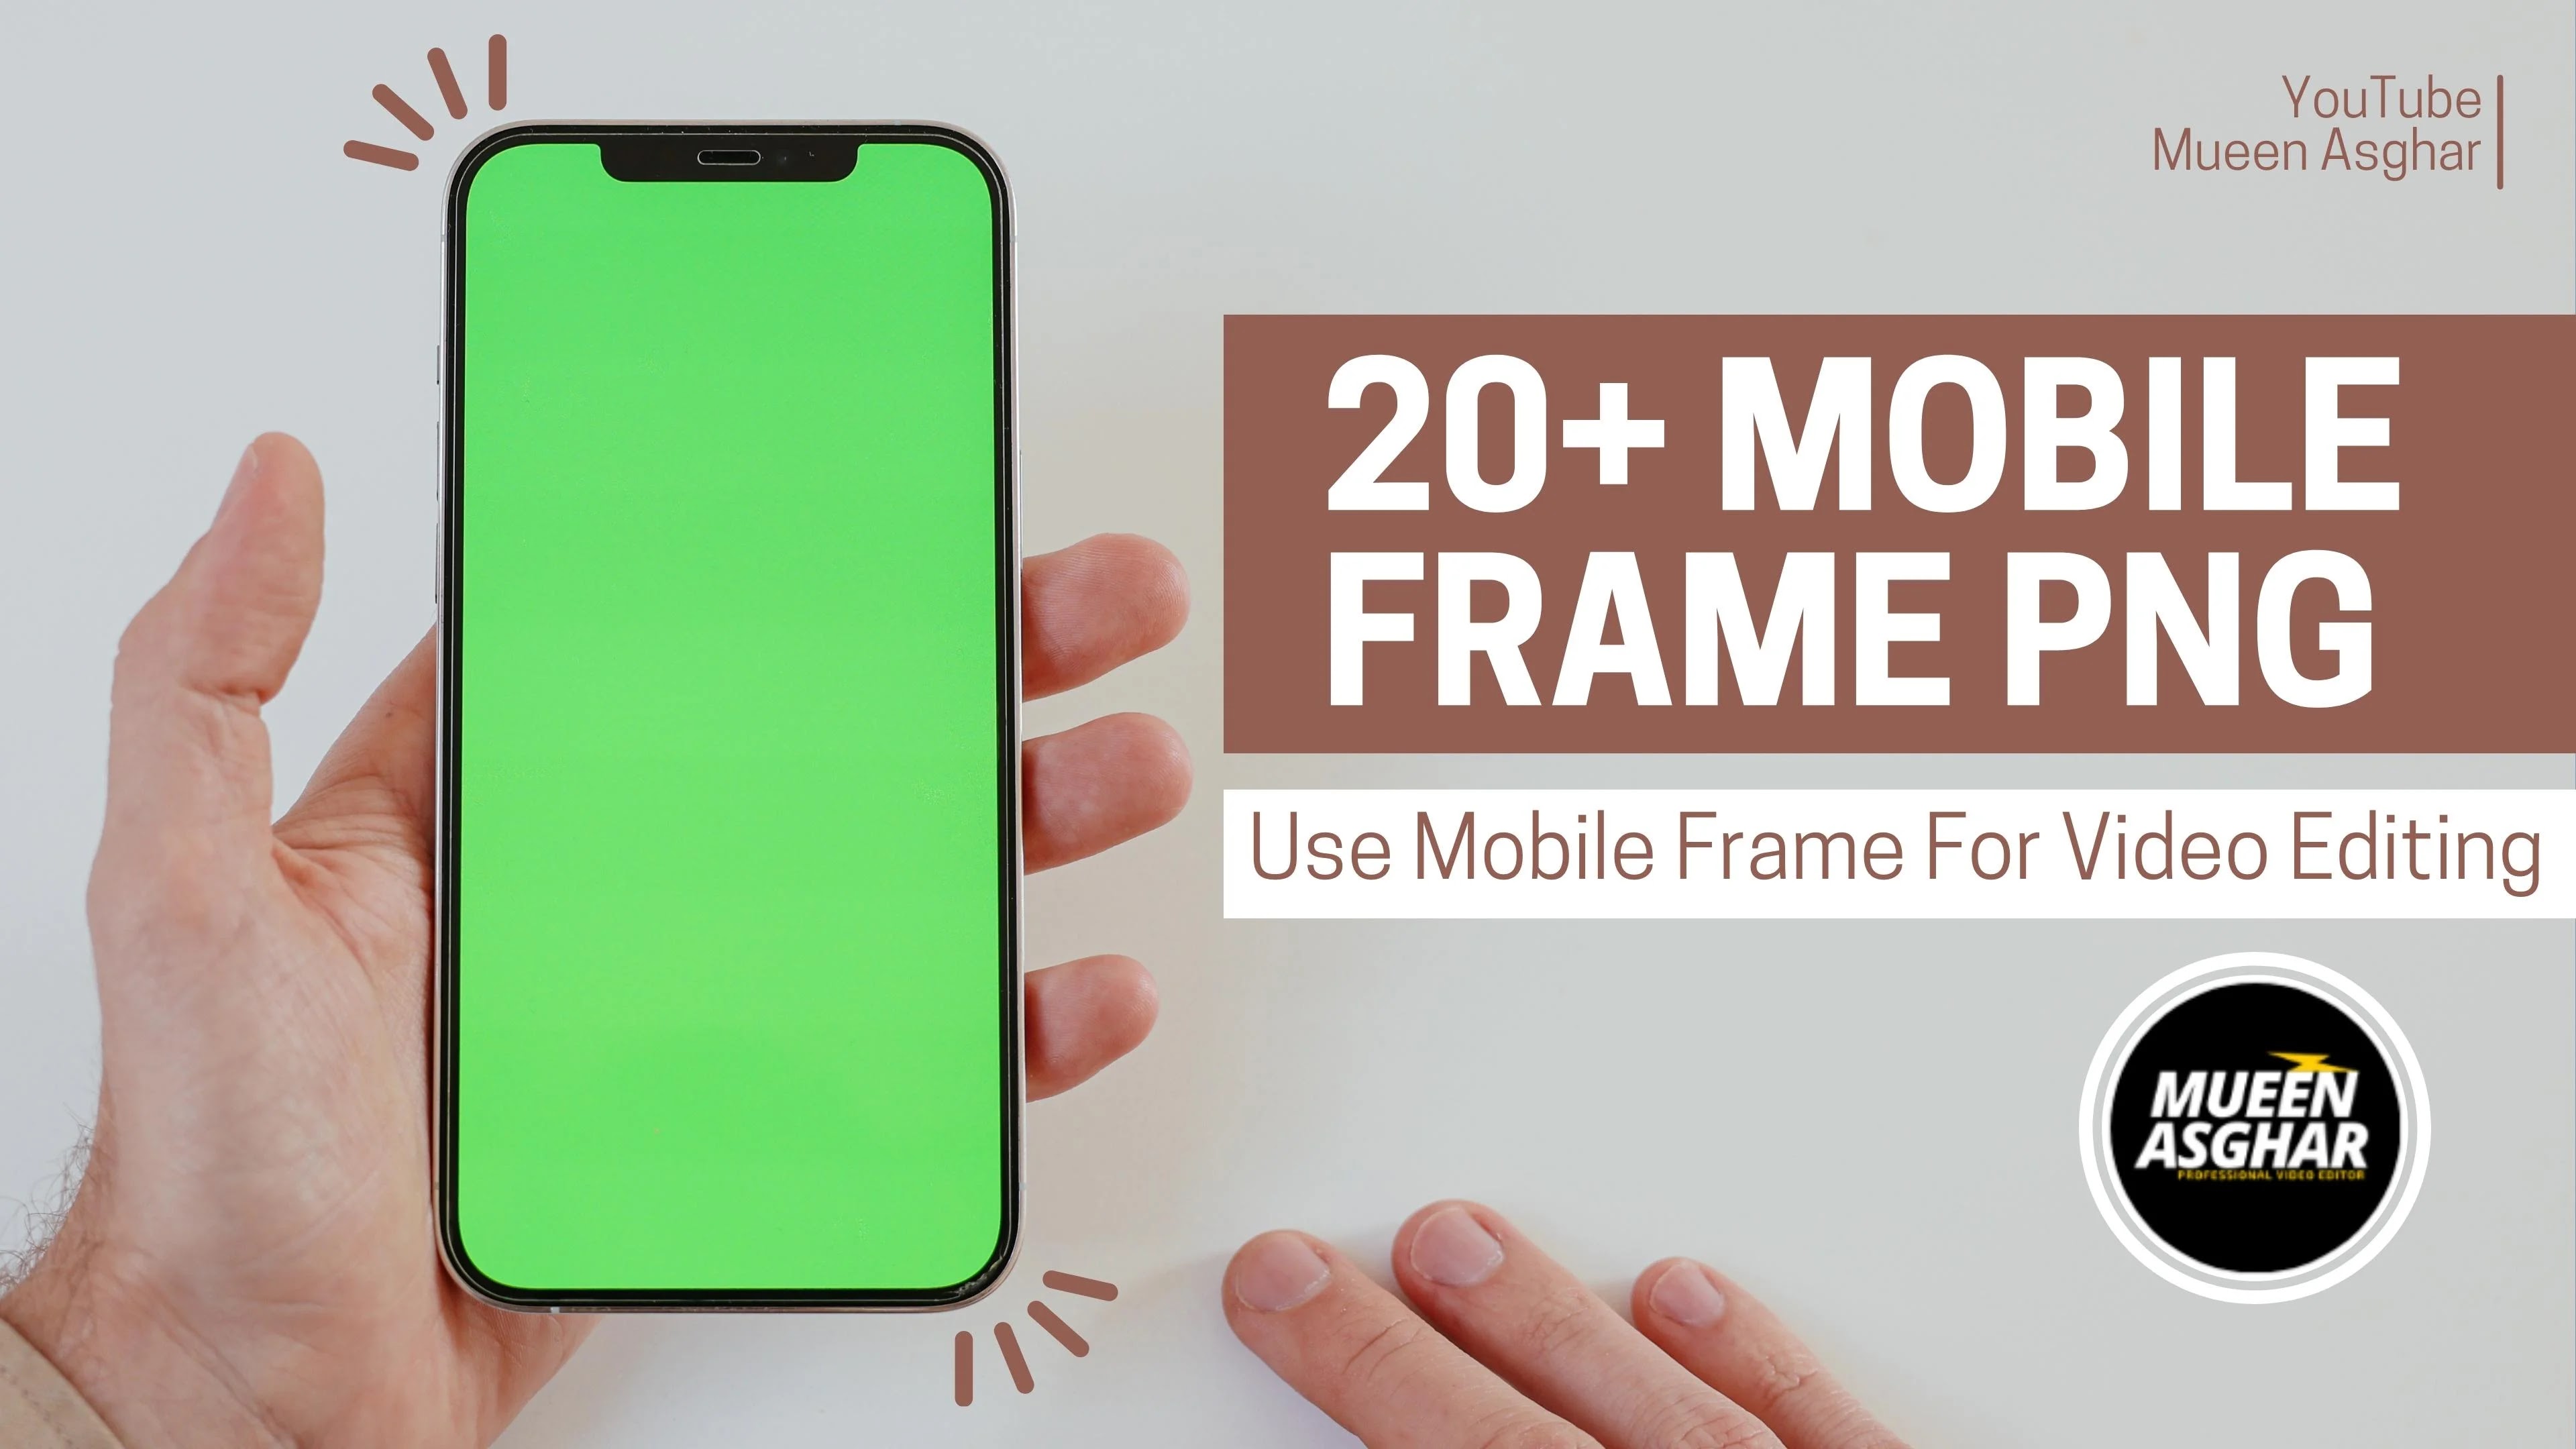 20+ Mobile frame Png, Download for free - Use Mobile Frame For Video Editing